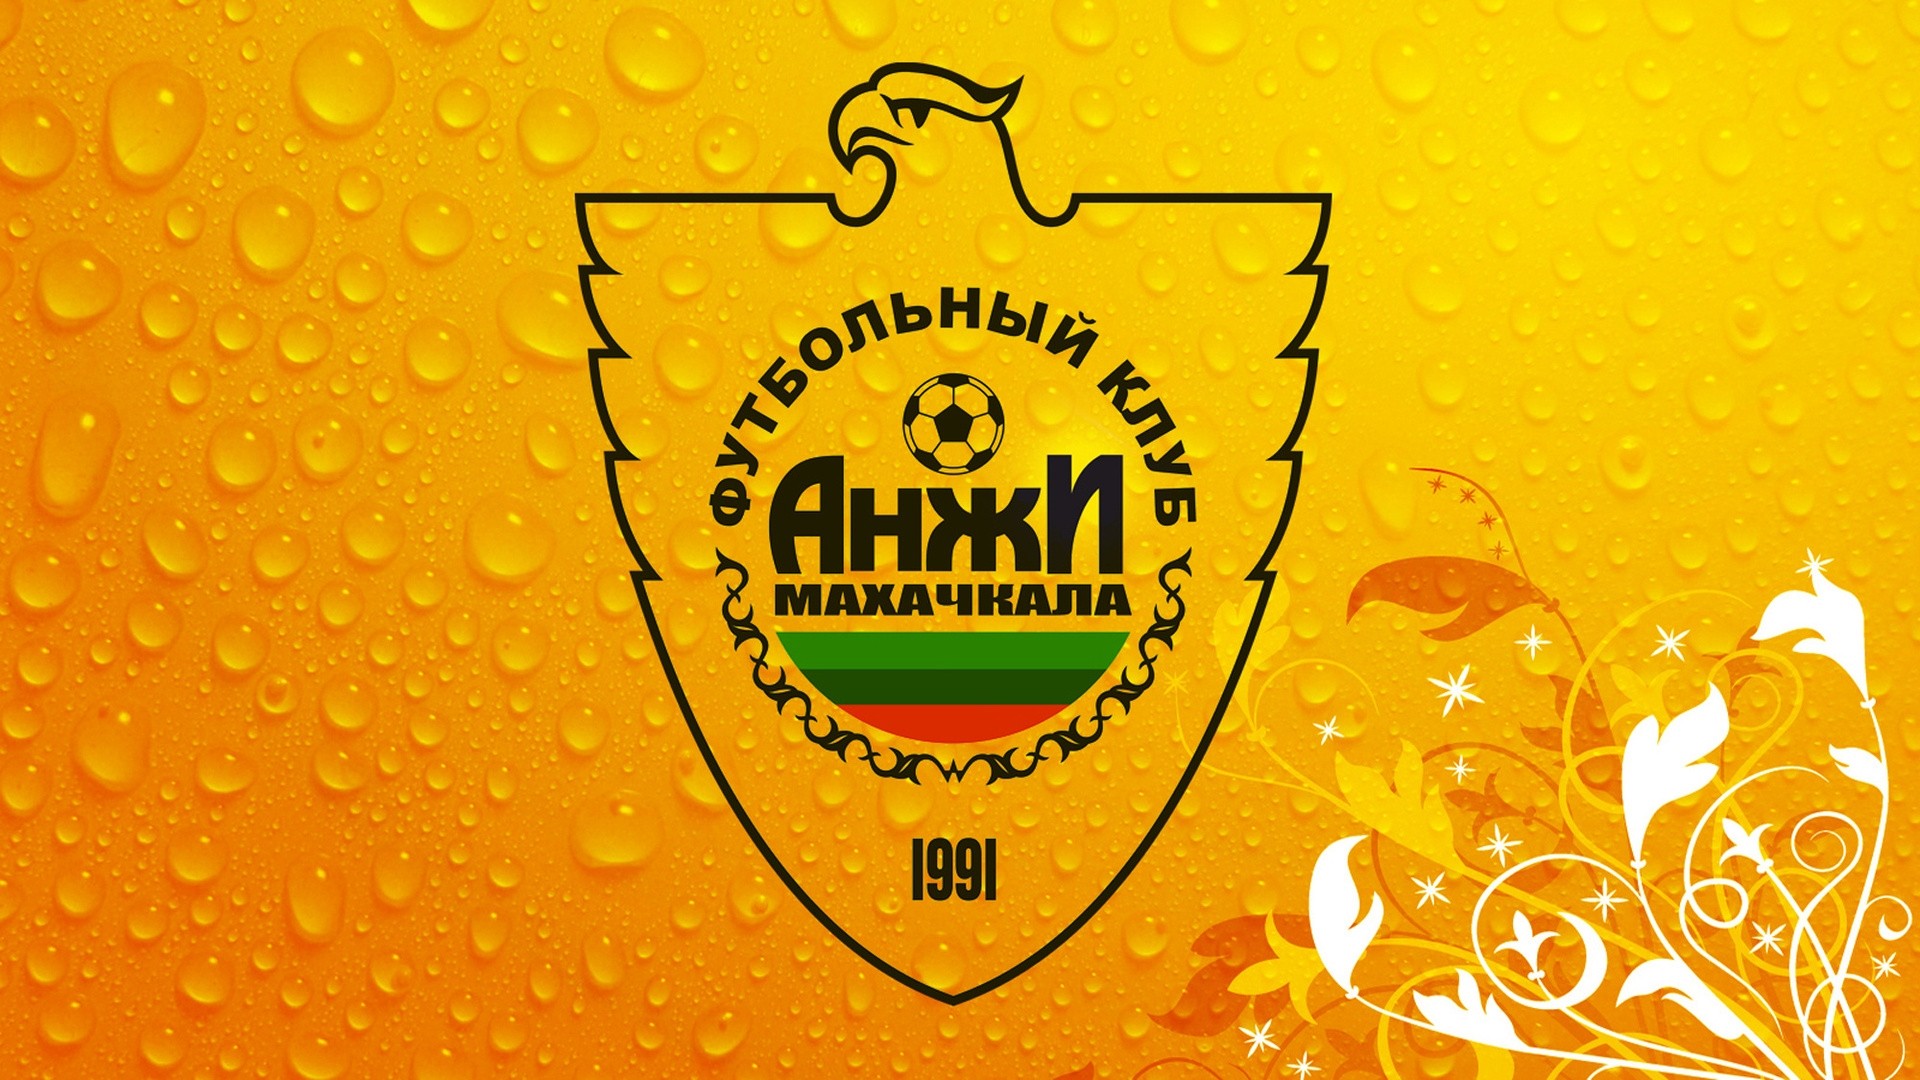 General 1920x1080 logo water drops numbers orange background 1991 (Year) soccer clubs Russia